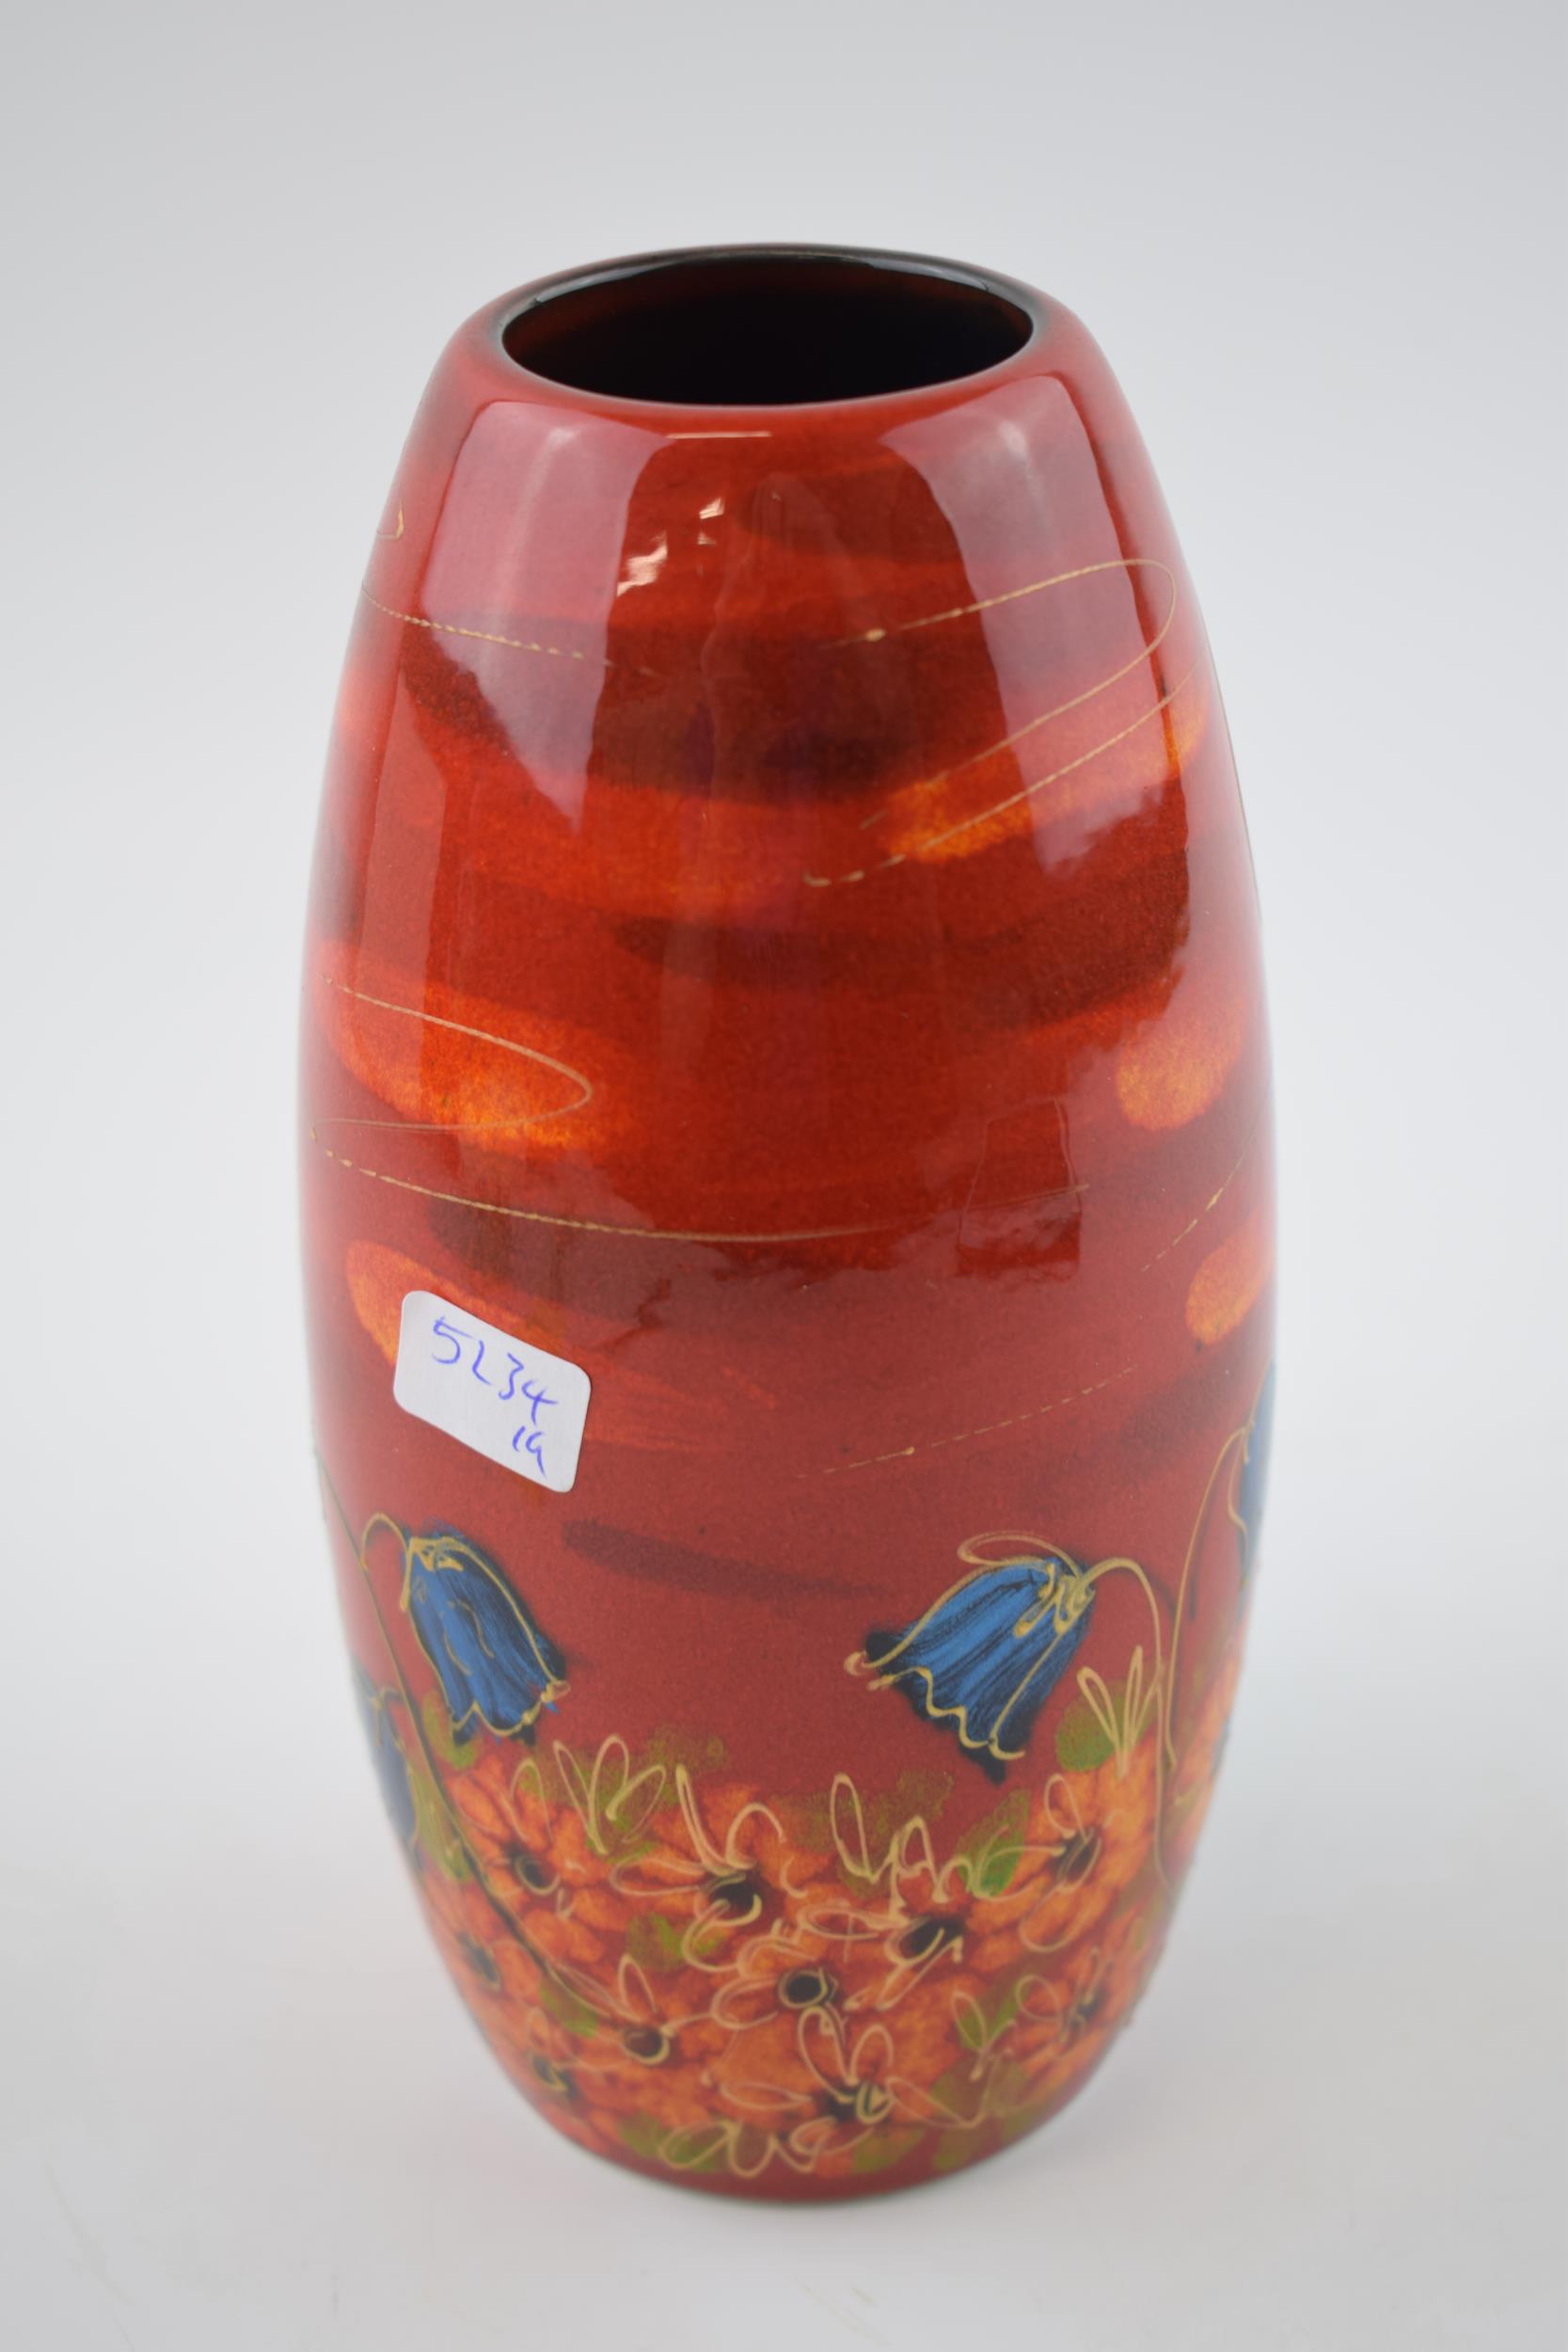 Anita Harris Art Pottery skittle vase, decorated with a hare silhouette, 18cm tall, signed by Anita. - Image 2 of 3